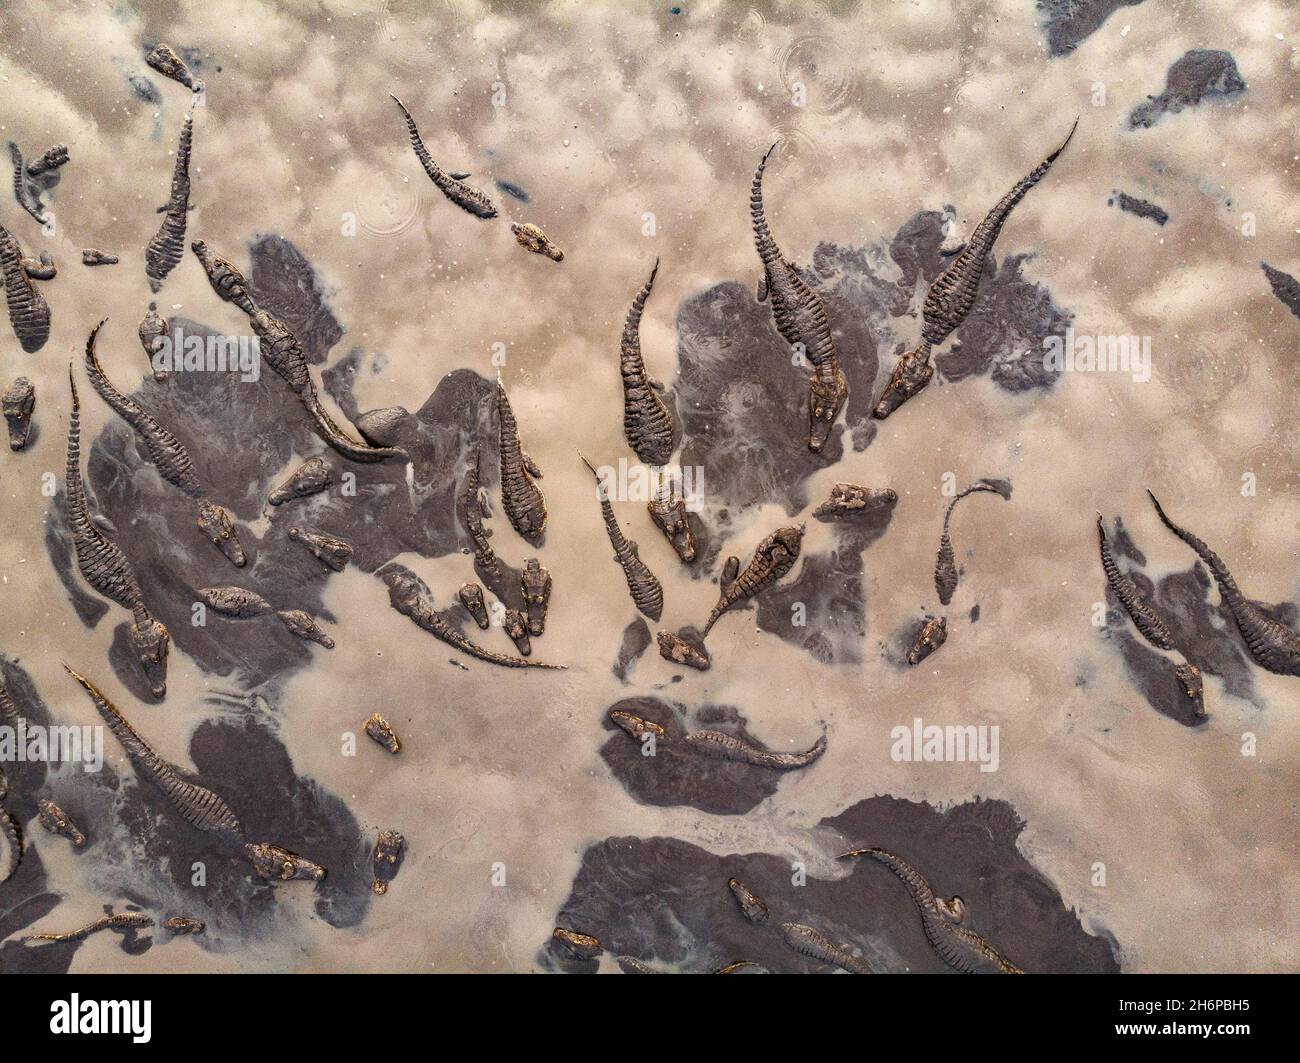 Lots of caimans gathering at a drying mud/water hole during an extreme dry season in the Pantanal of Brazil Stock Photo